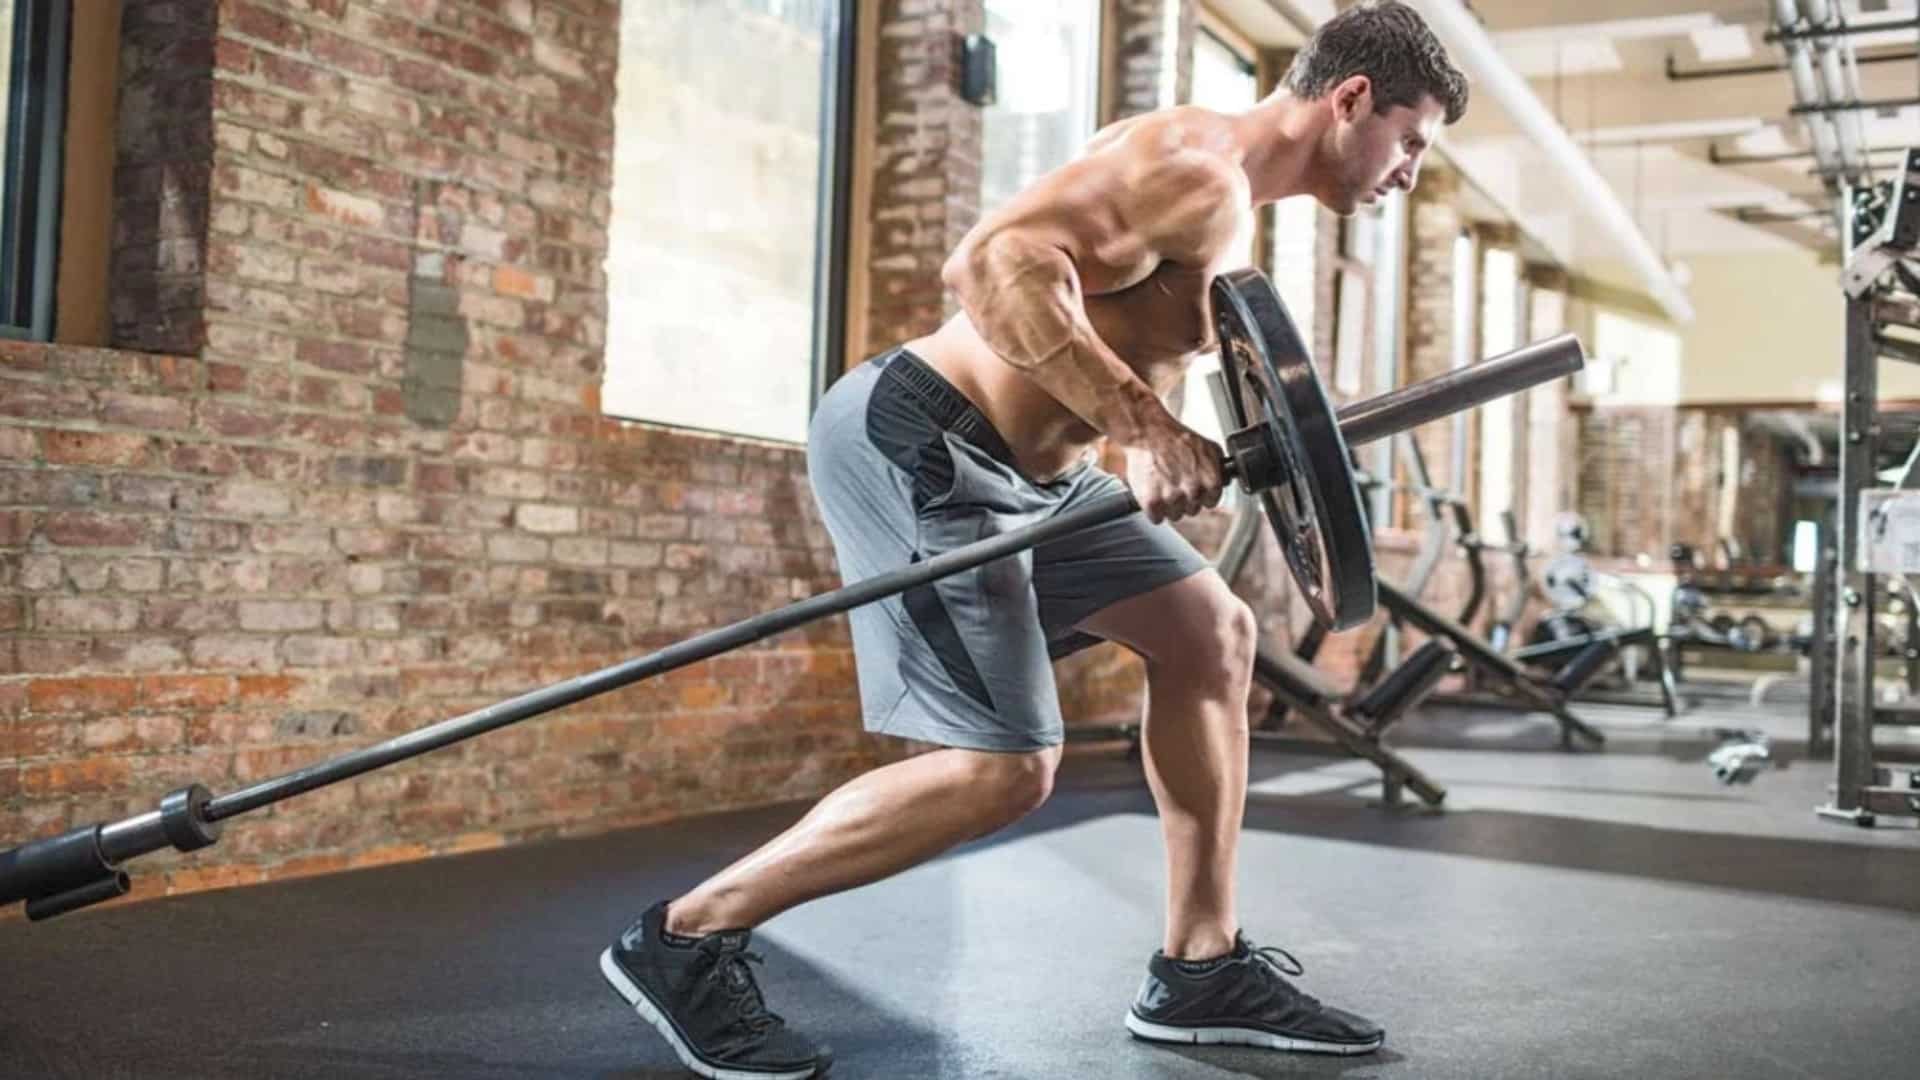 Landmine Exercises for Building Muscle and Strength